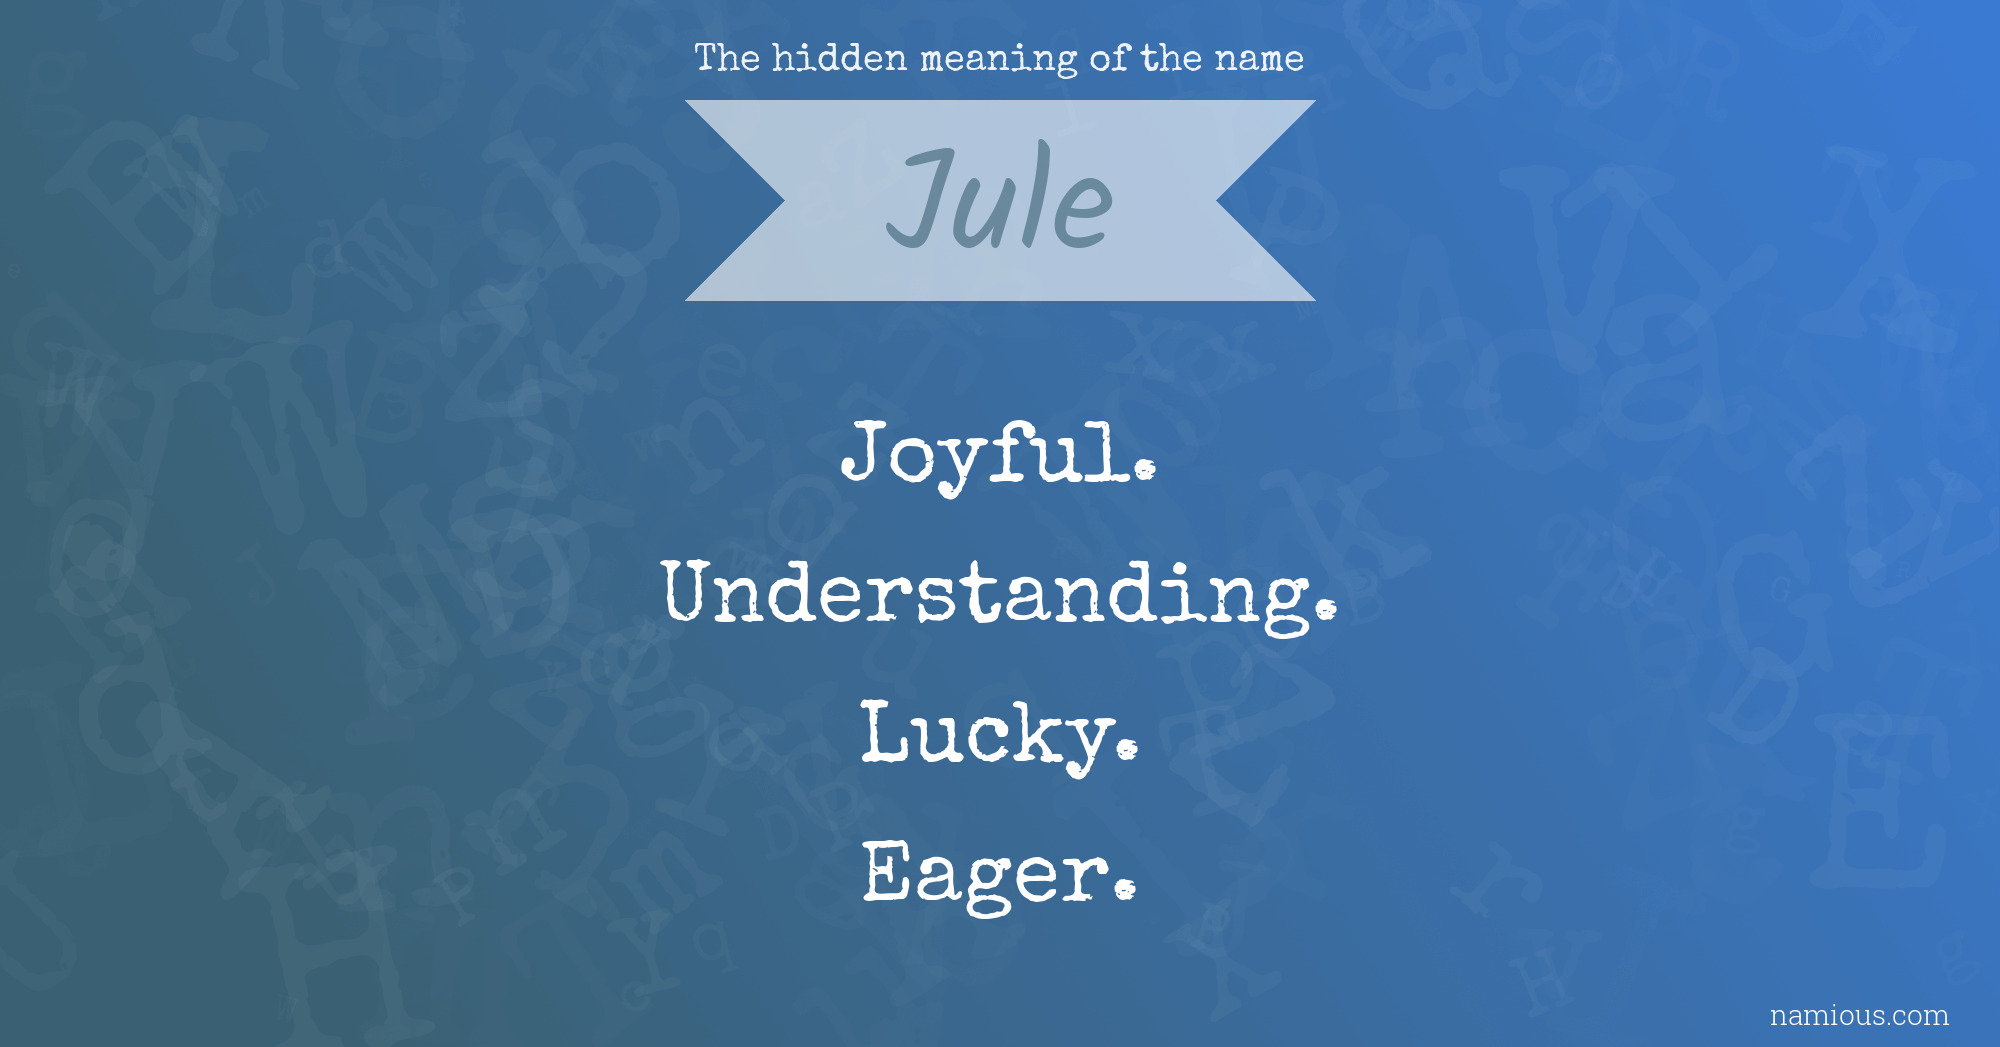 The hidden meaning of the name Jule | Namious